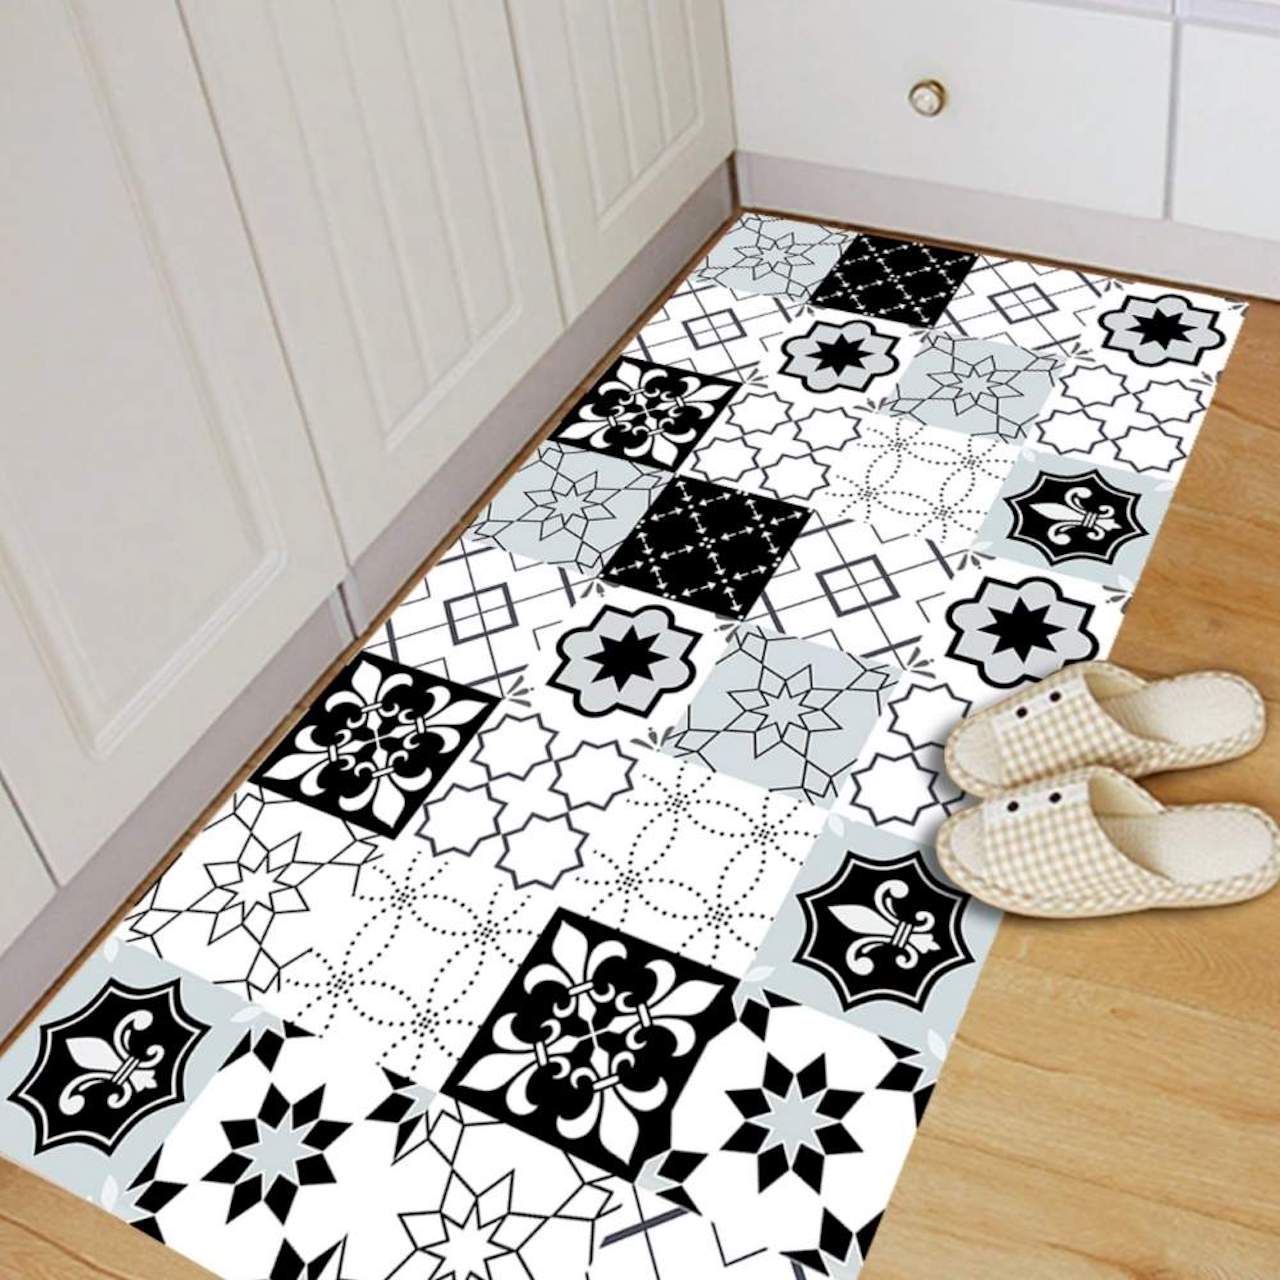 Where To Buy Peel And Stick Tiles